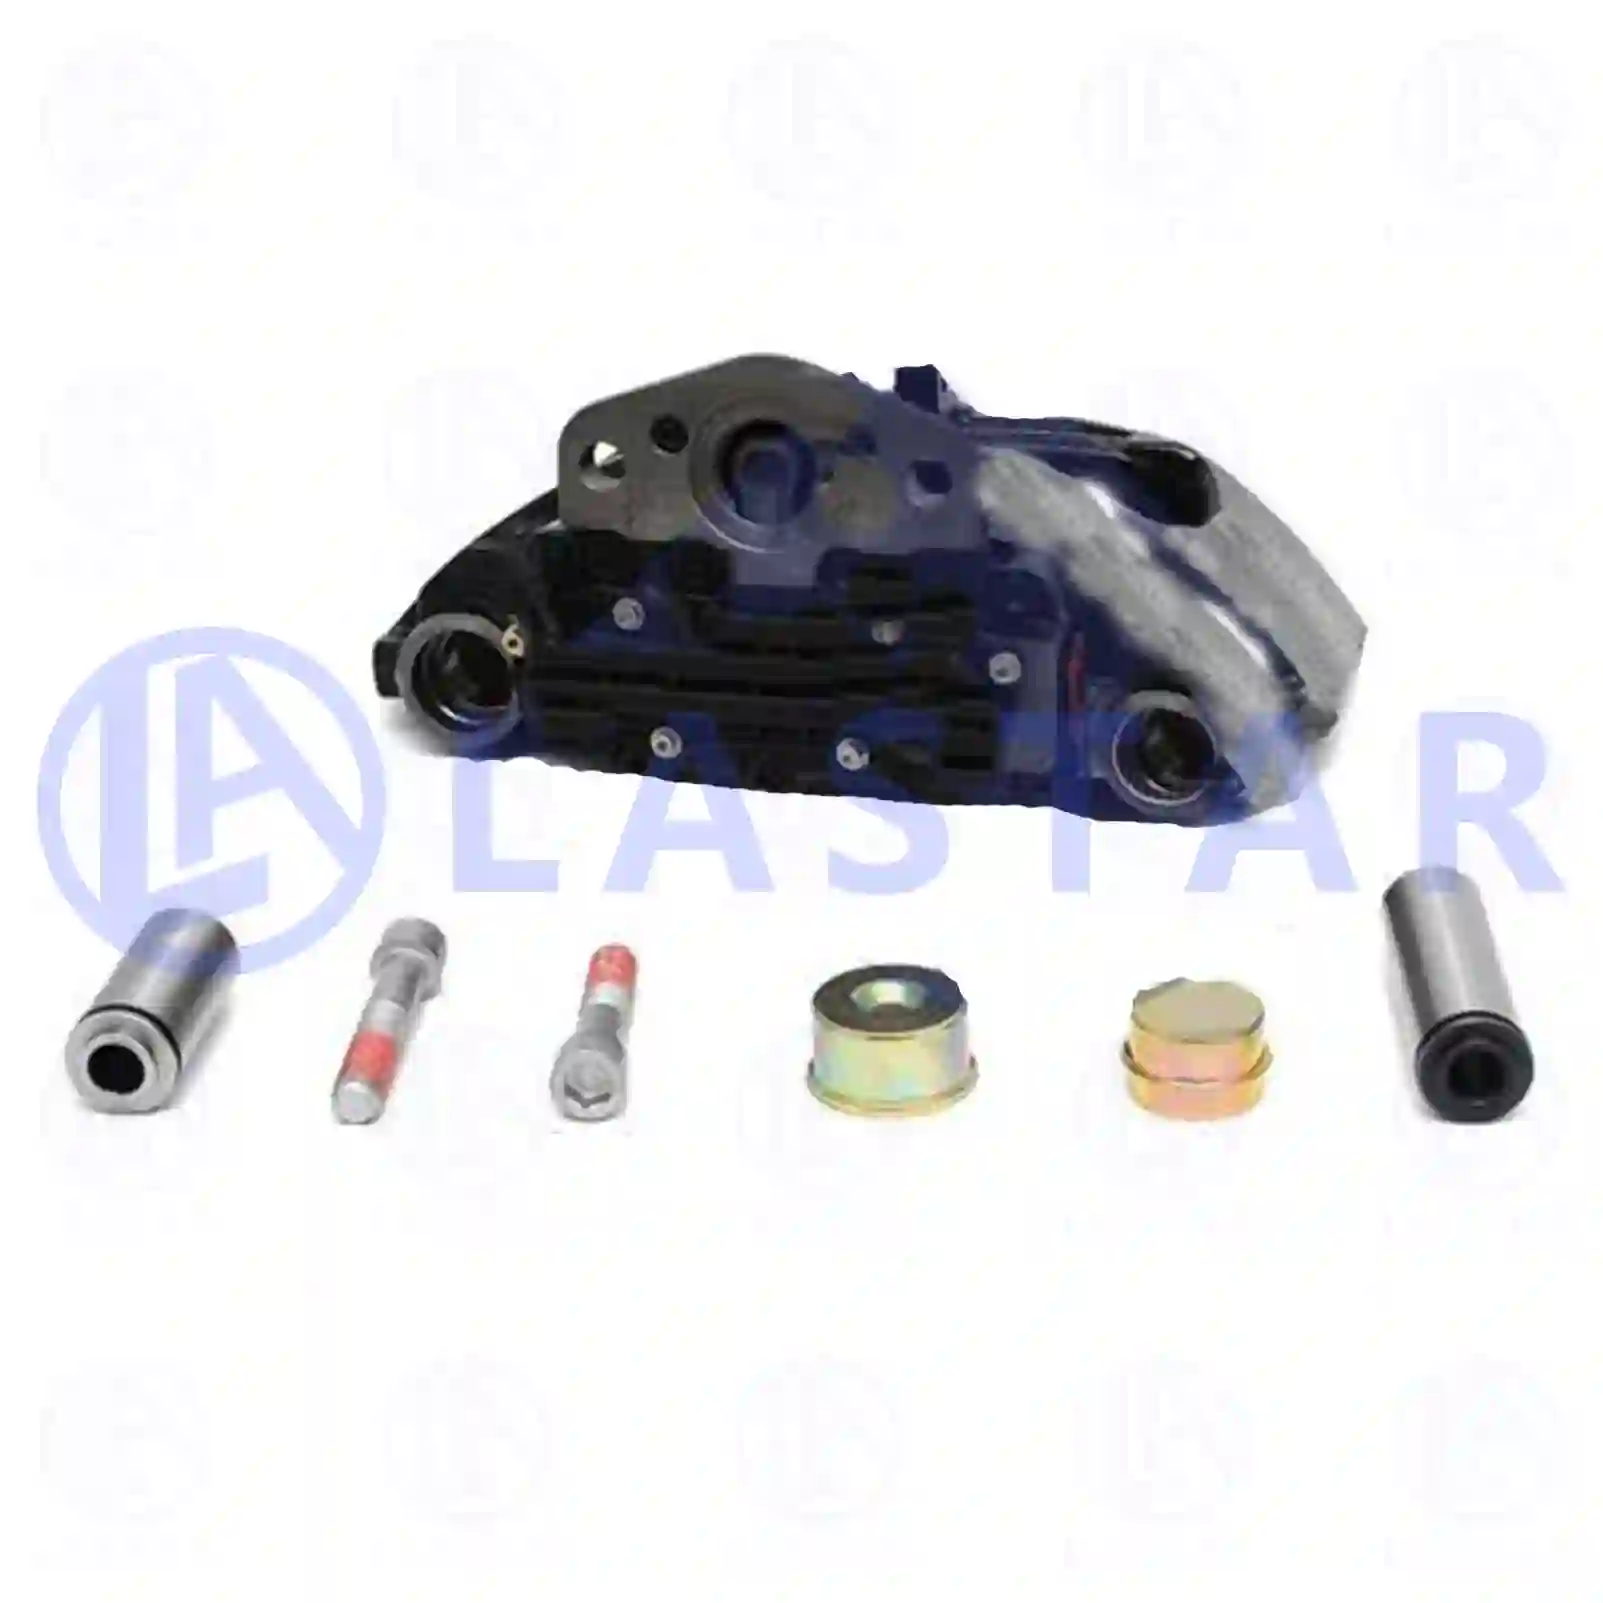 Brake caliper, reman. / without old core, 77716418, 14000552, SM48610K, SM48612K, SM48614K, SM48616K, SM48618K, SM48635K, SM48637K, SM48641K, SM48643K, SM4866K, SM4868K, 65847043, 709285160, 9285160, S269231R, 81508046453, 81508046459, 81508046461, 81508046463, 6274300190, 011014065, 011015479, 082136000, 10571164, 1363749, 1446731, 1473364, 1511582, 1513590, 1517004, 1731224, 1744256, 1756386, 1921155, 1928818, 1946324, 517004, 571164, 0501006017 ||  77716418 Lastar Spare Part | Truck Spare Parts, Auotomotive Spare Parts Brake caliper, reman. / without old core, 77716418, 14000552, SM48610K, SM48612K, SM48614K, SM48616K, SM48618K, SM48635K, SM48637K, SM48641K, SM48643K, SM4866K, SM4868K, 65847043, 709285160, 9285160, S269231R, 81508046453, 81508046459, 81508046461, 81508046463, 6274300190, 011014065, 011015479, 082136000, 10571164, 1363749, 1446731, 1473364, 1511582, 1513590, 1517004, 1731224, 1744256, 1756386, 1921155, 1928818, 1946324, 517004, 571164, 0501006017 ||  77716418 Lastar Spare Part | Truck Spare Parts, Auotomotive Spare Parts